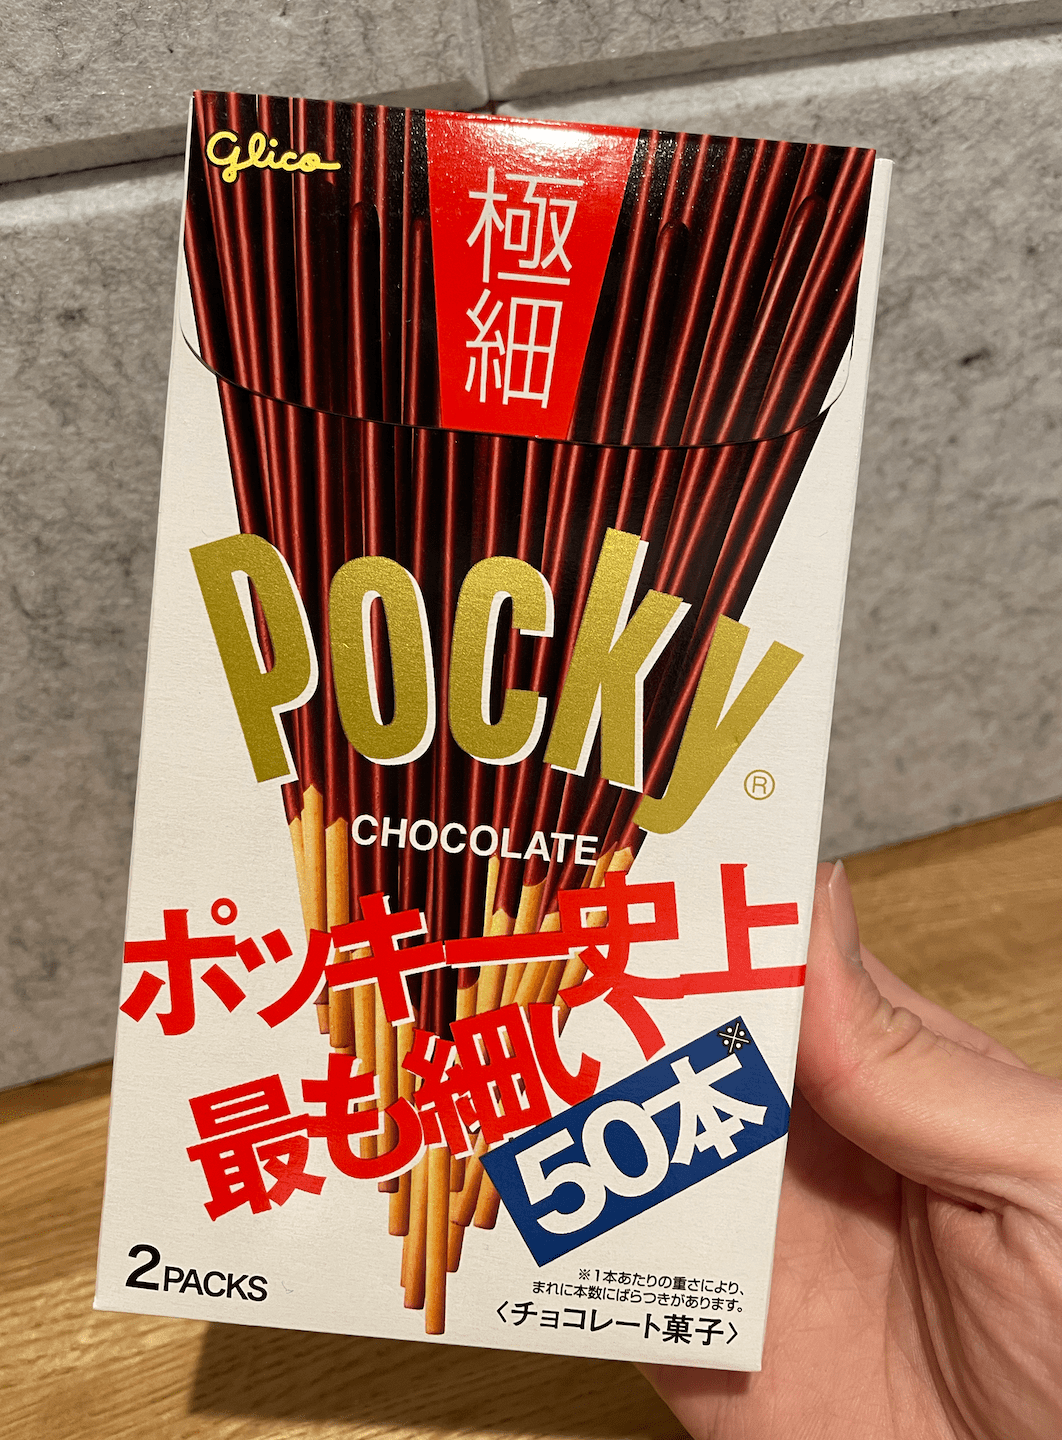 Actual product image of Pocky extra fine 1